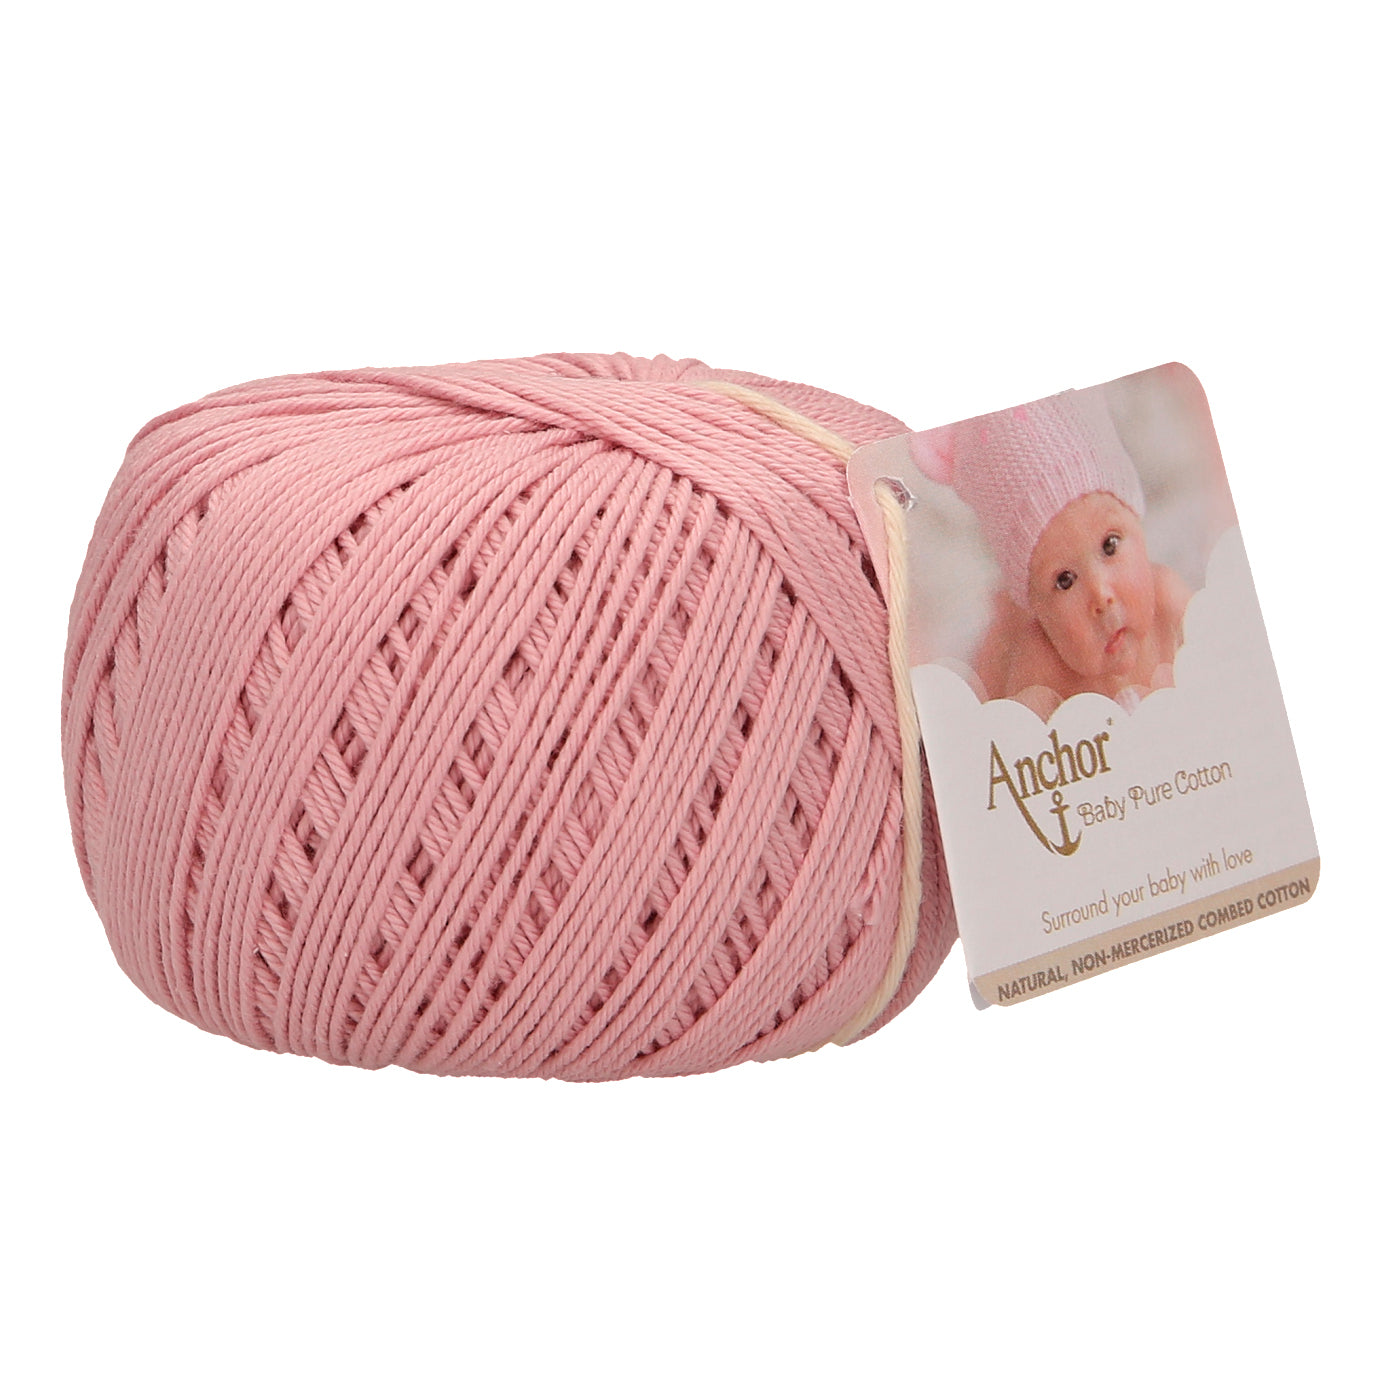 Anchor Baby Pure Cotton 4ply Yarn Pink 0423